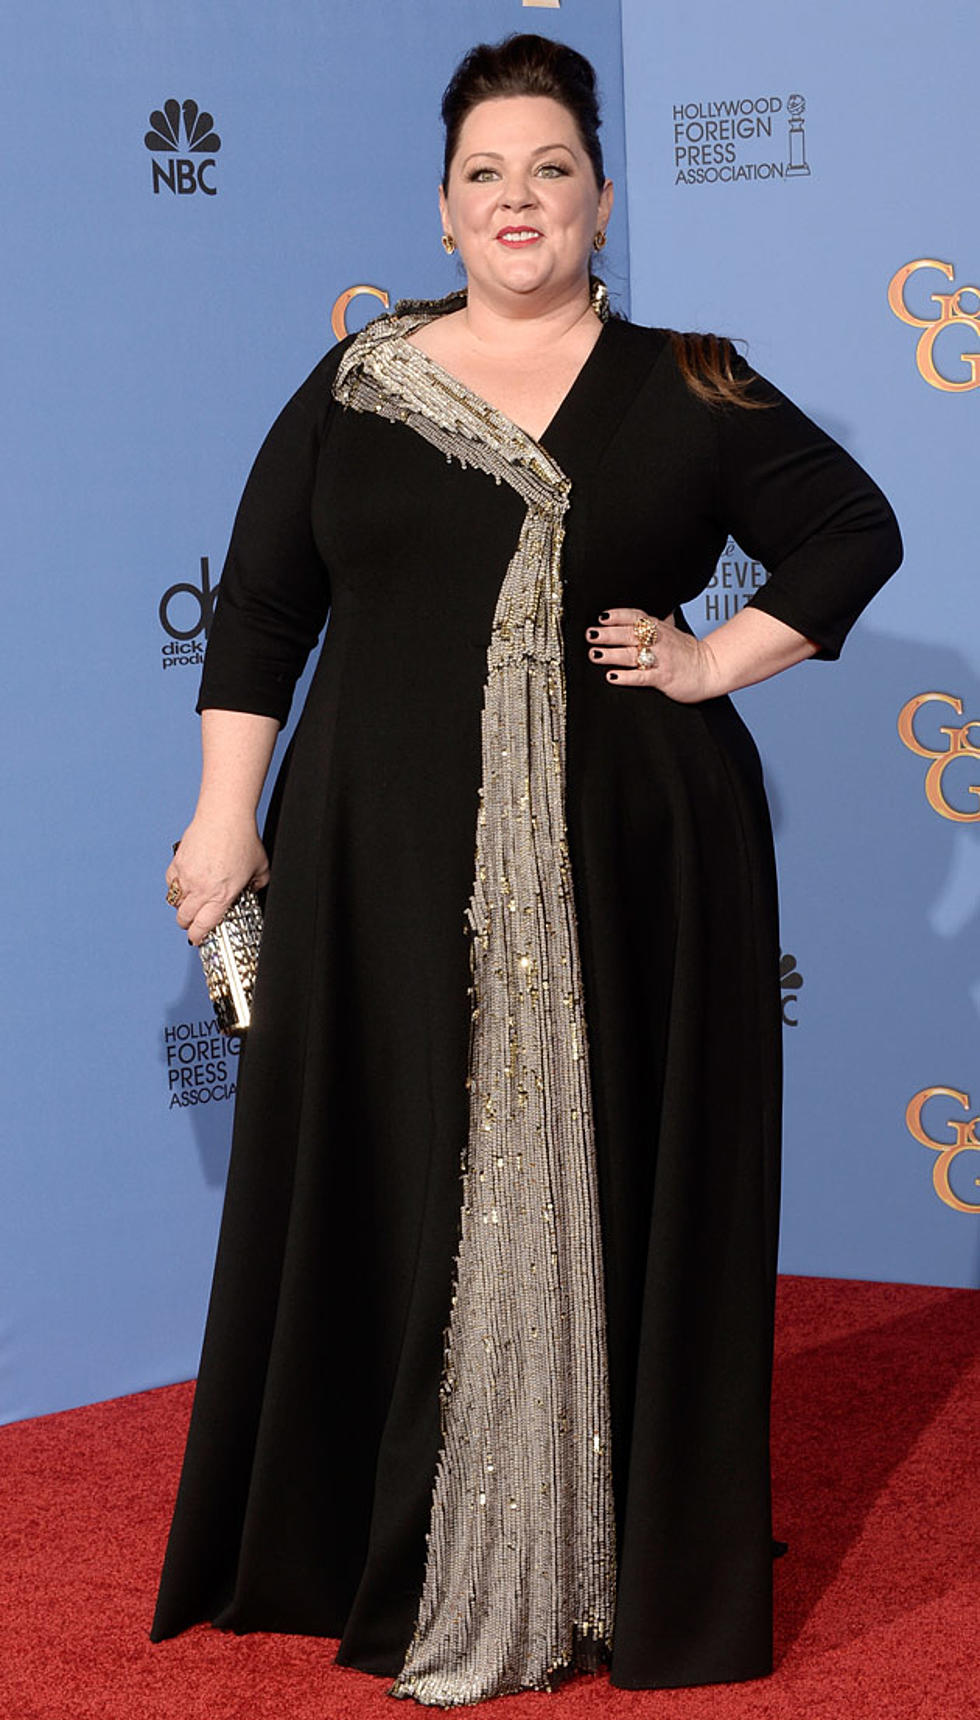 Melissa McCarthy Looks Chic in a Draped Dress on the 2014 Golden Globes Red Carpet [PHOTOS]